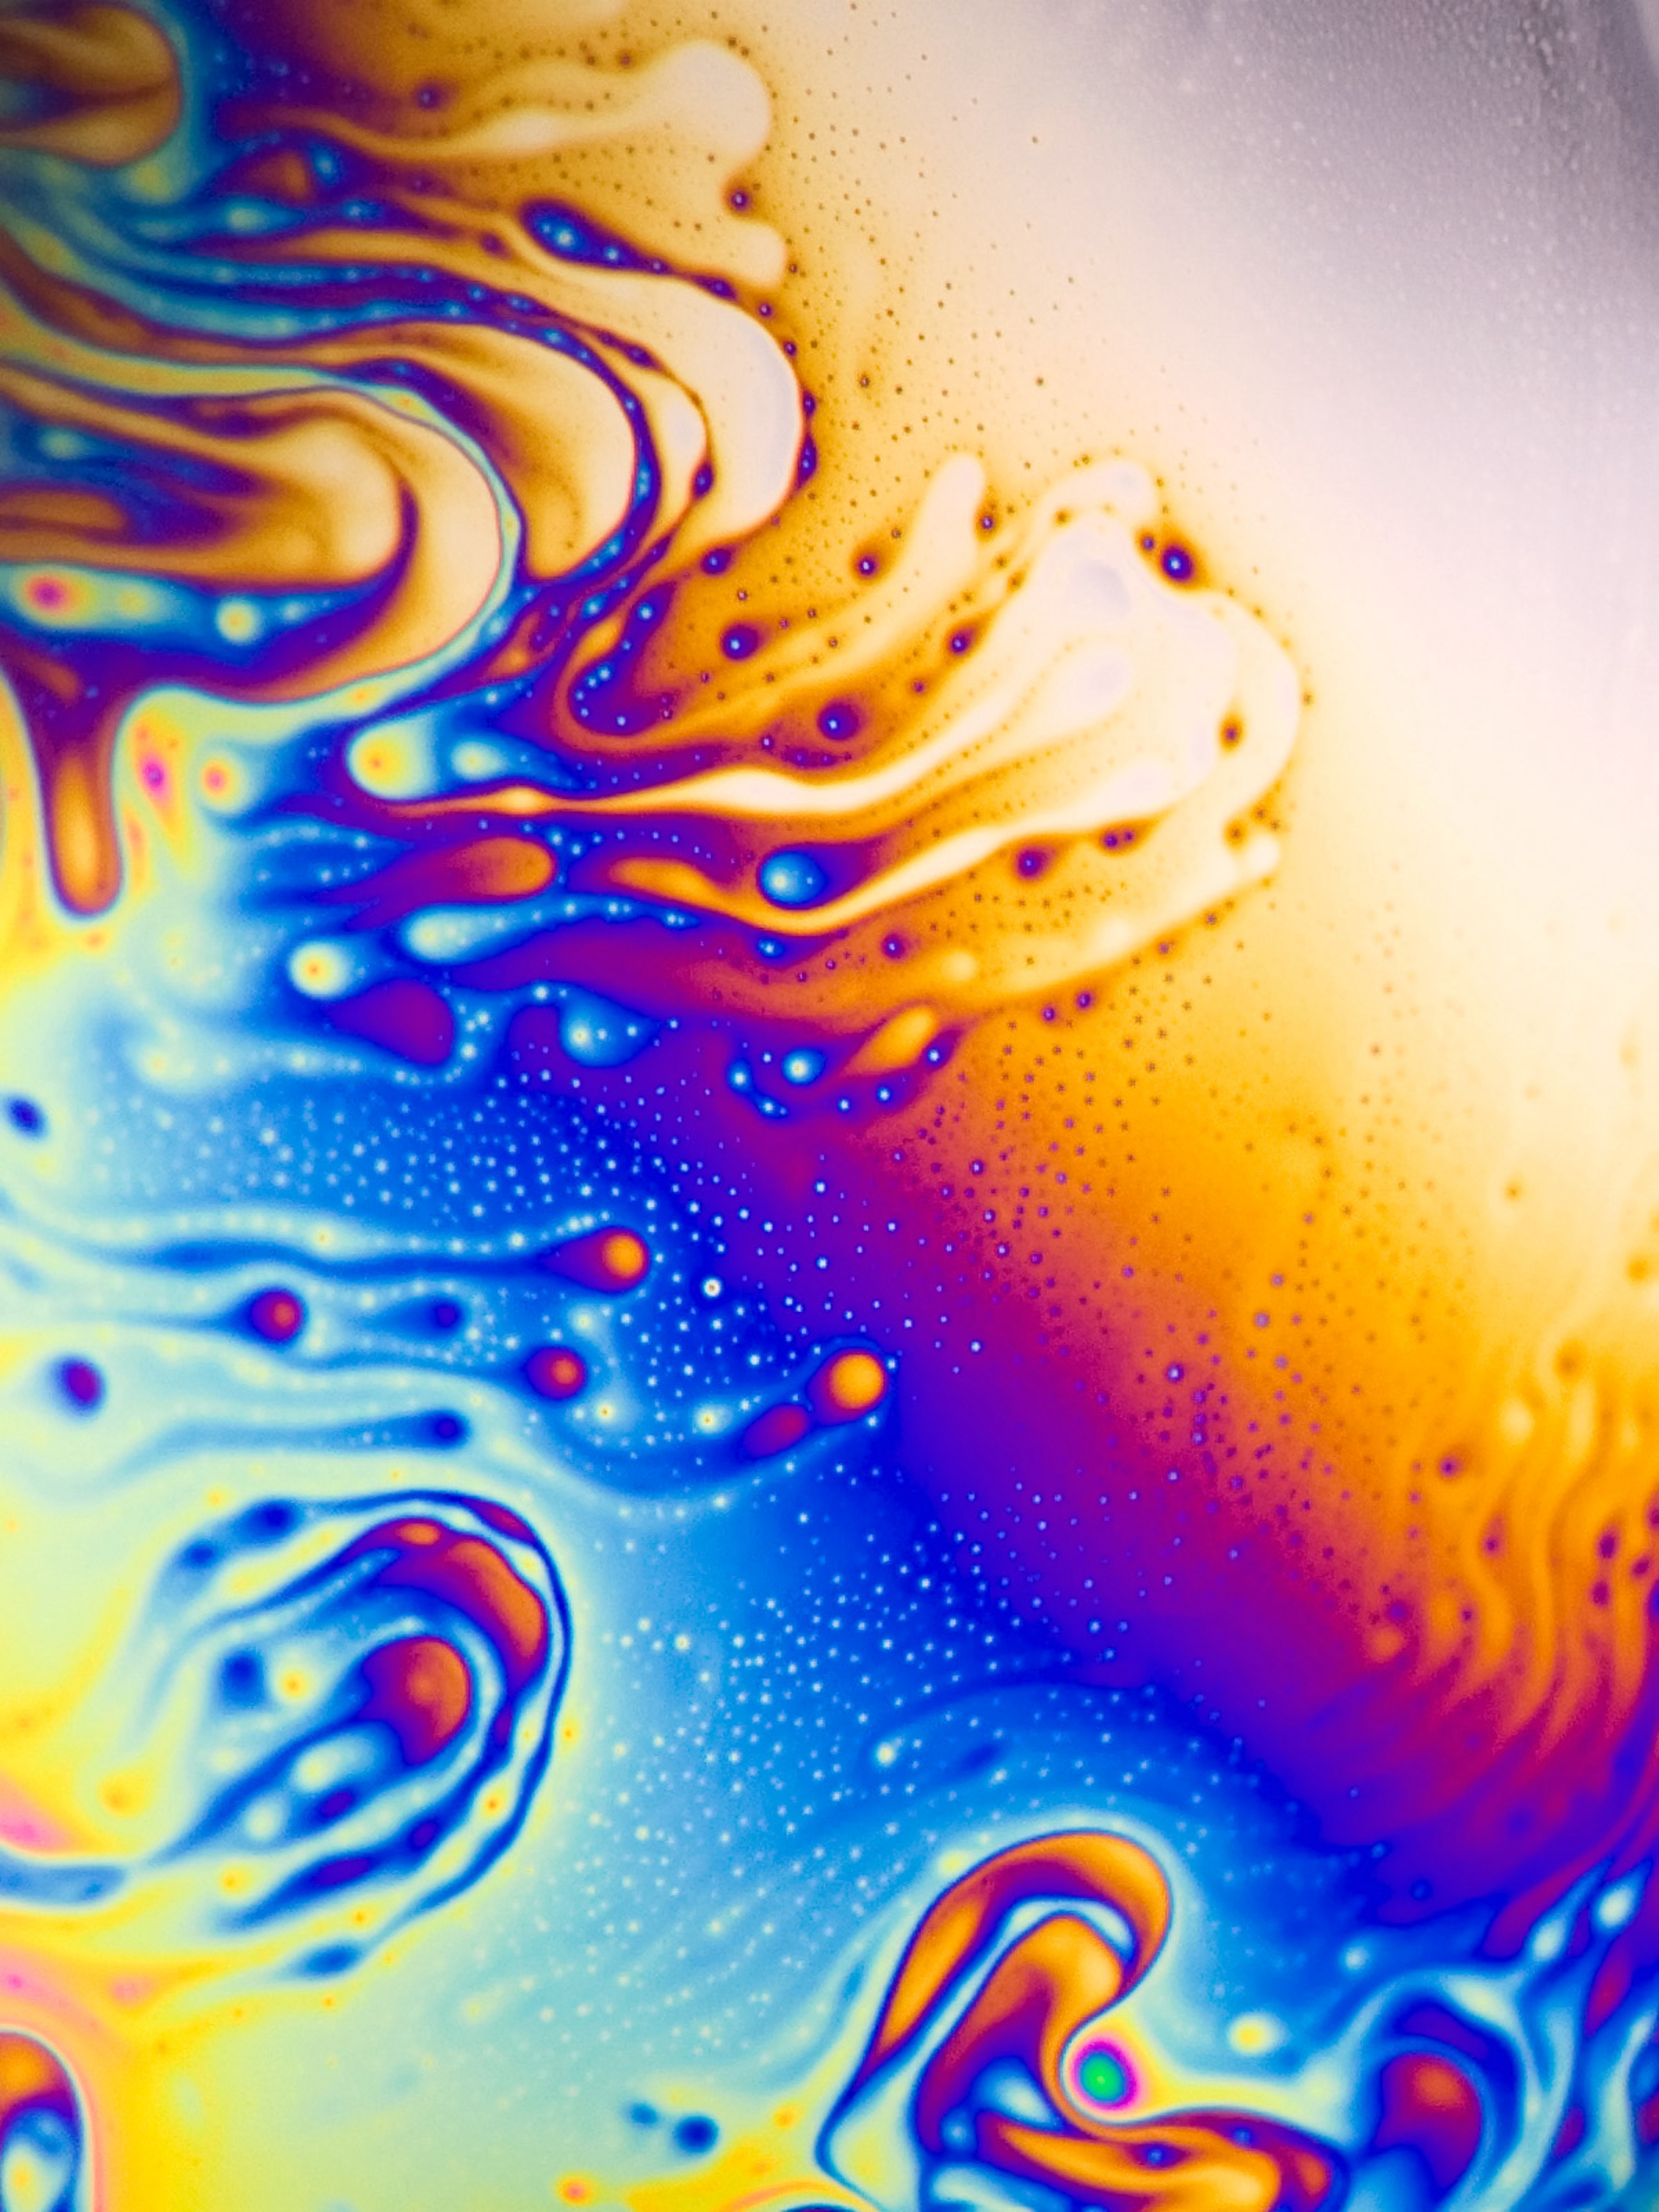 144813 download wallpaper bubbles, macro, divorces, liquid, color, mixing, coloured, saturated screensavers and pictures for free